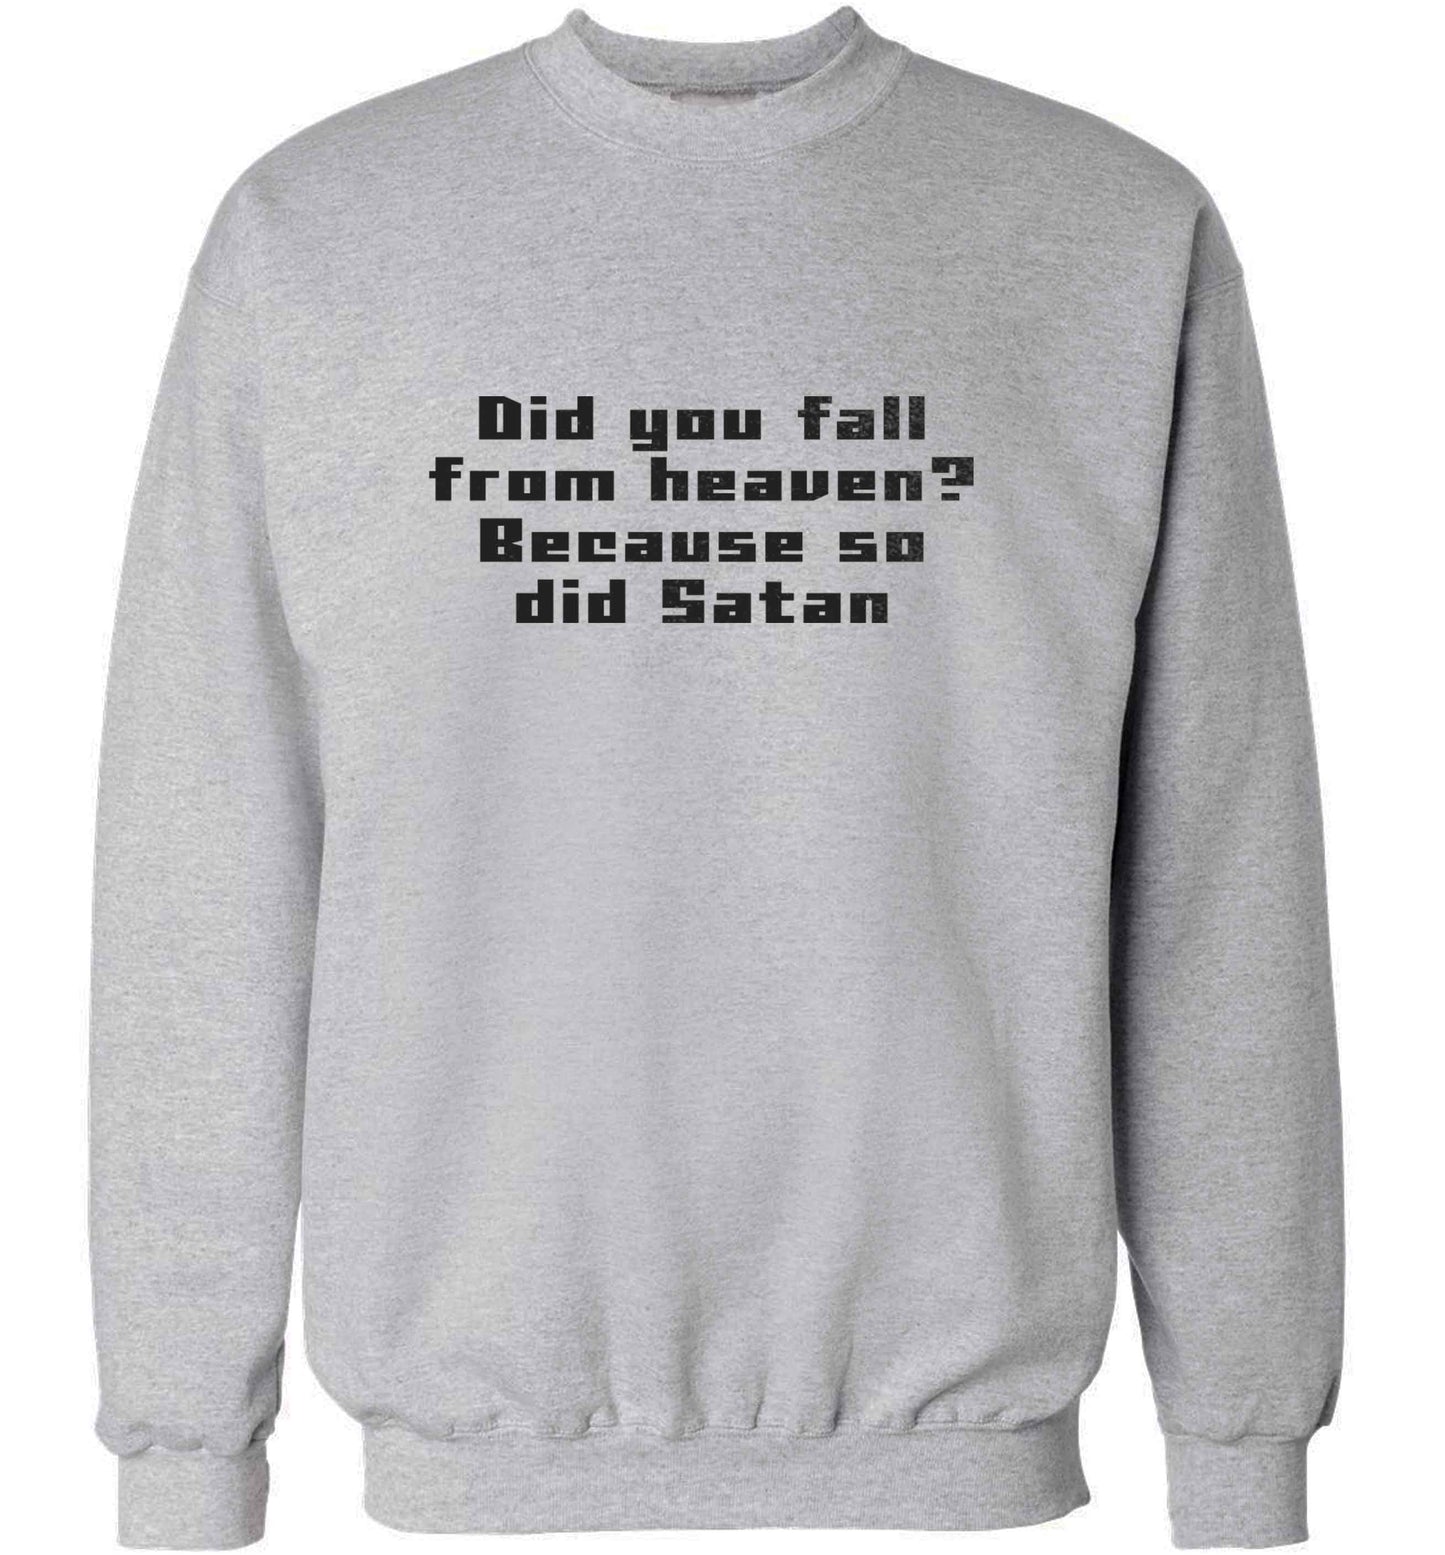 Did you fall from Heaven because so did Satan adult's unisex grey sweater 2XL